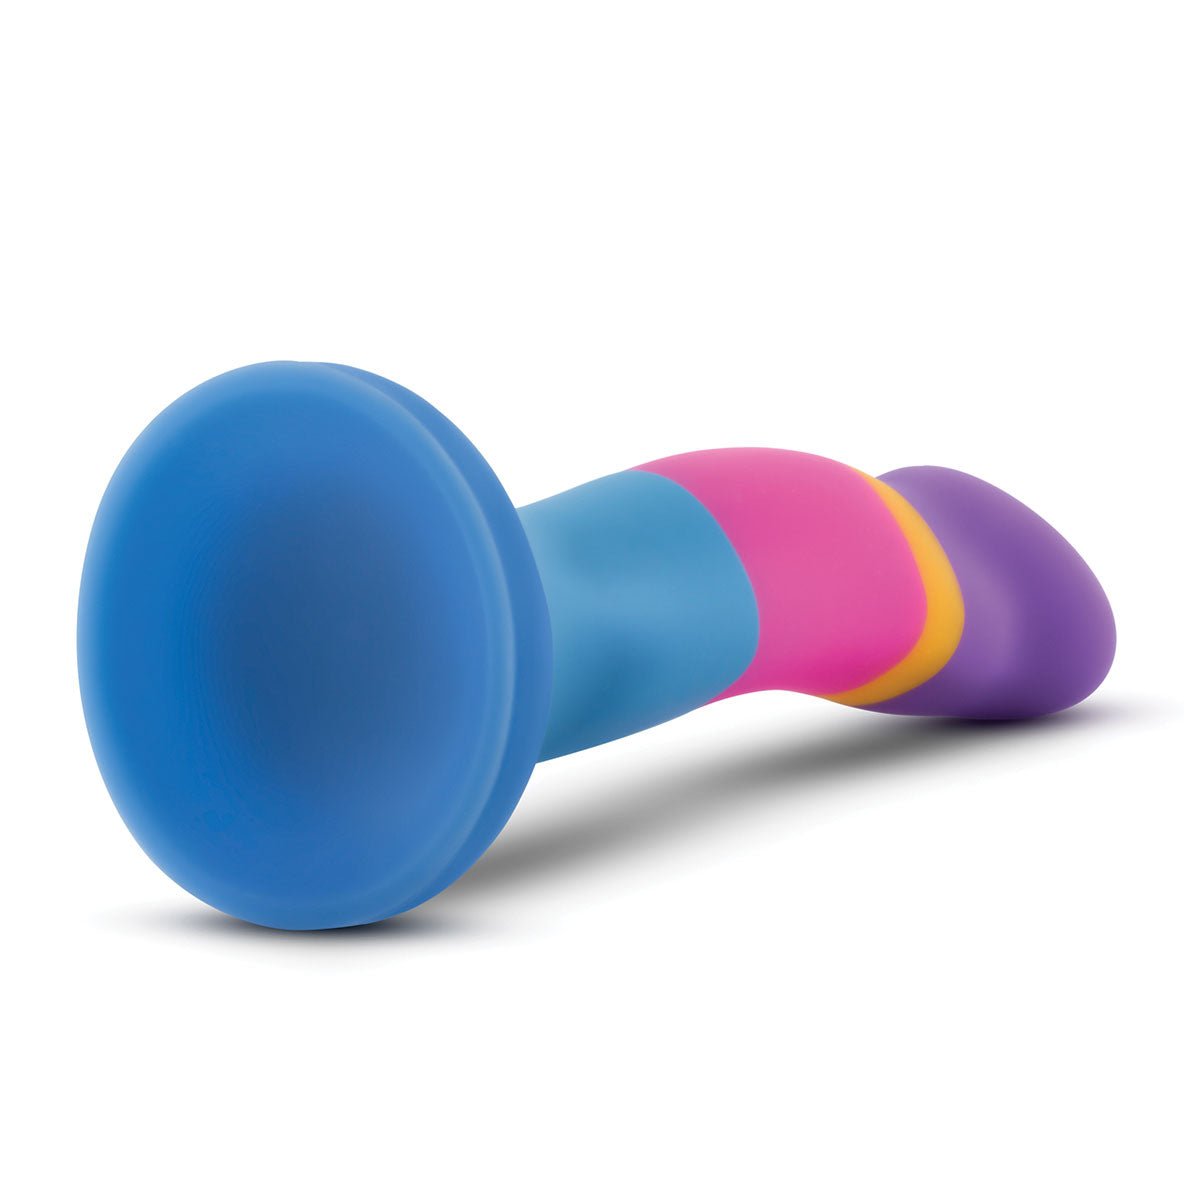 Avant D1 Hot N' Cool Multi-Color Silicone Dildo by Blush